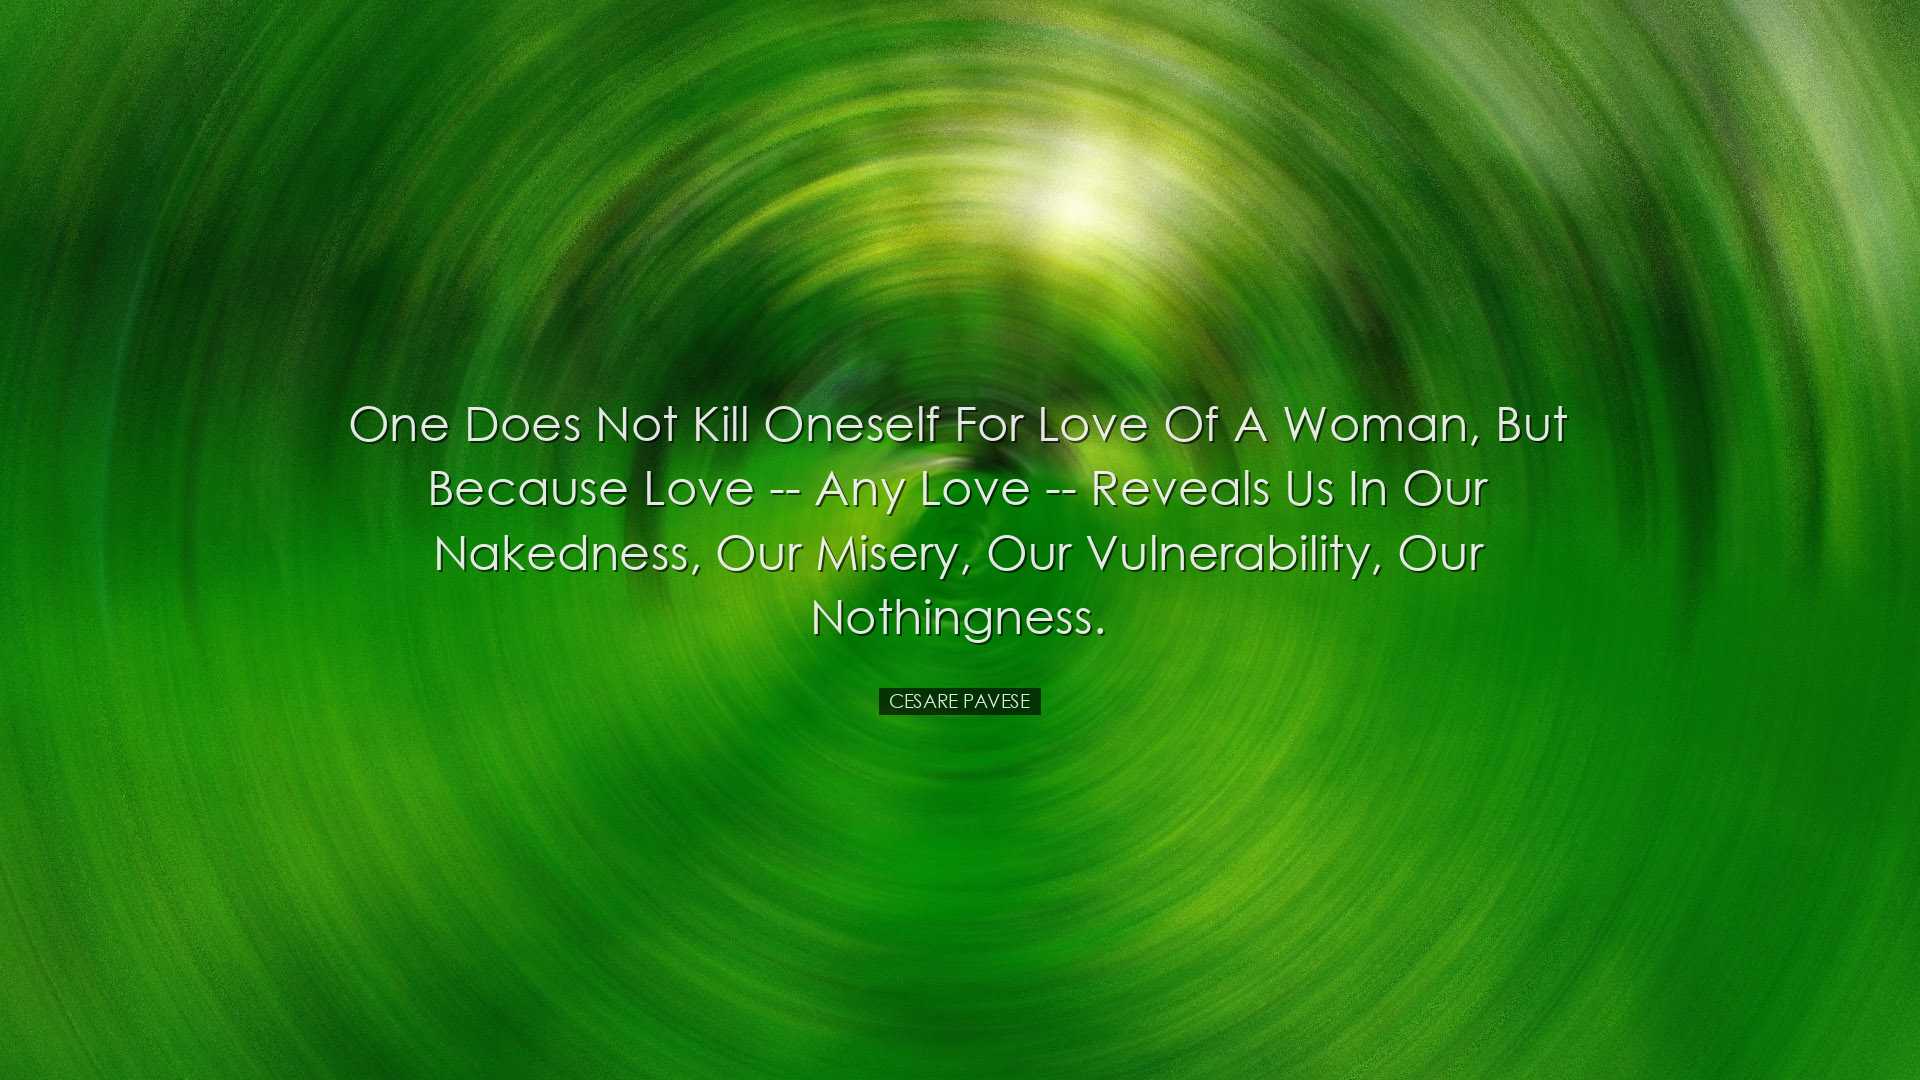 One does not kill oneself for love of a woman, but because love --